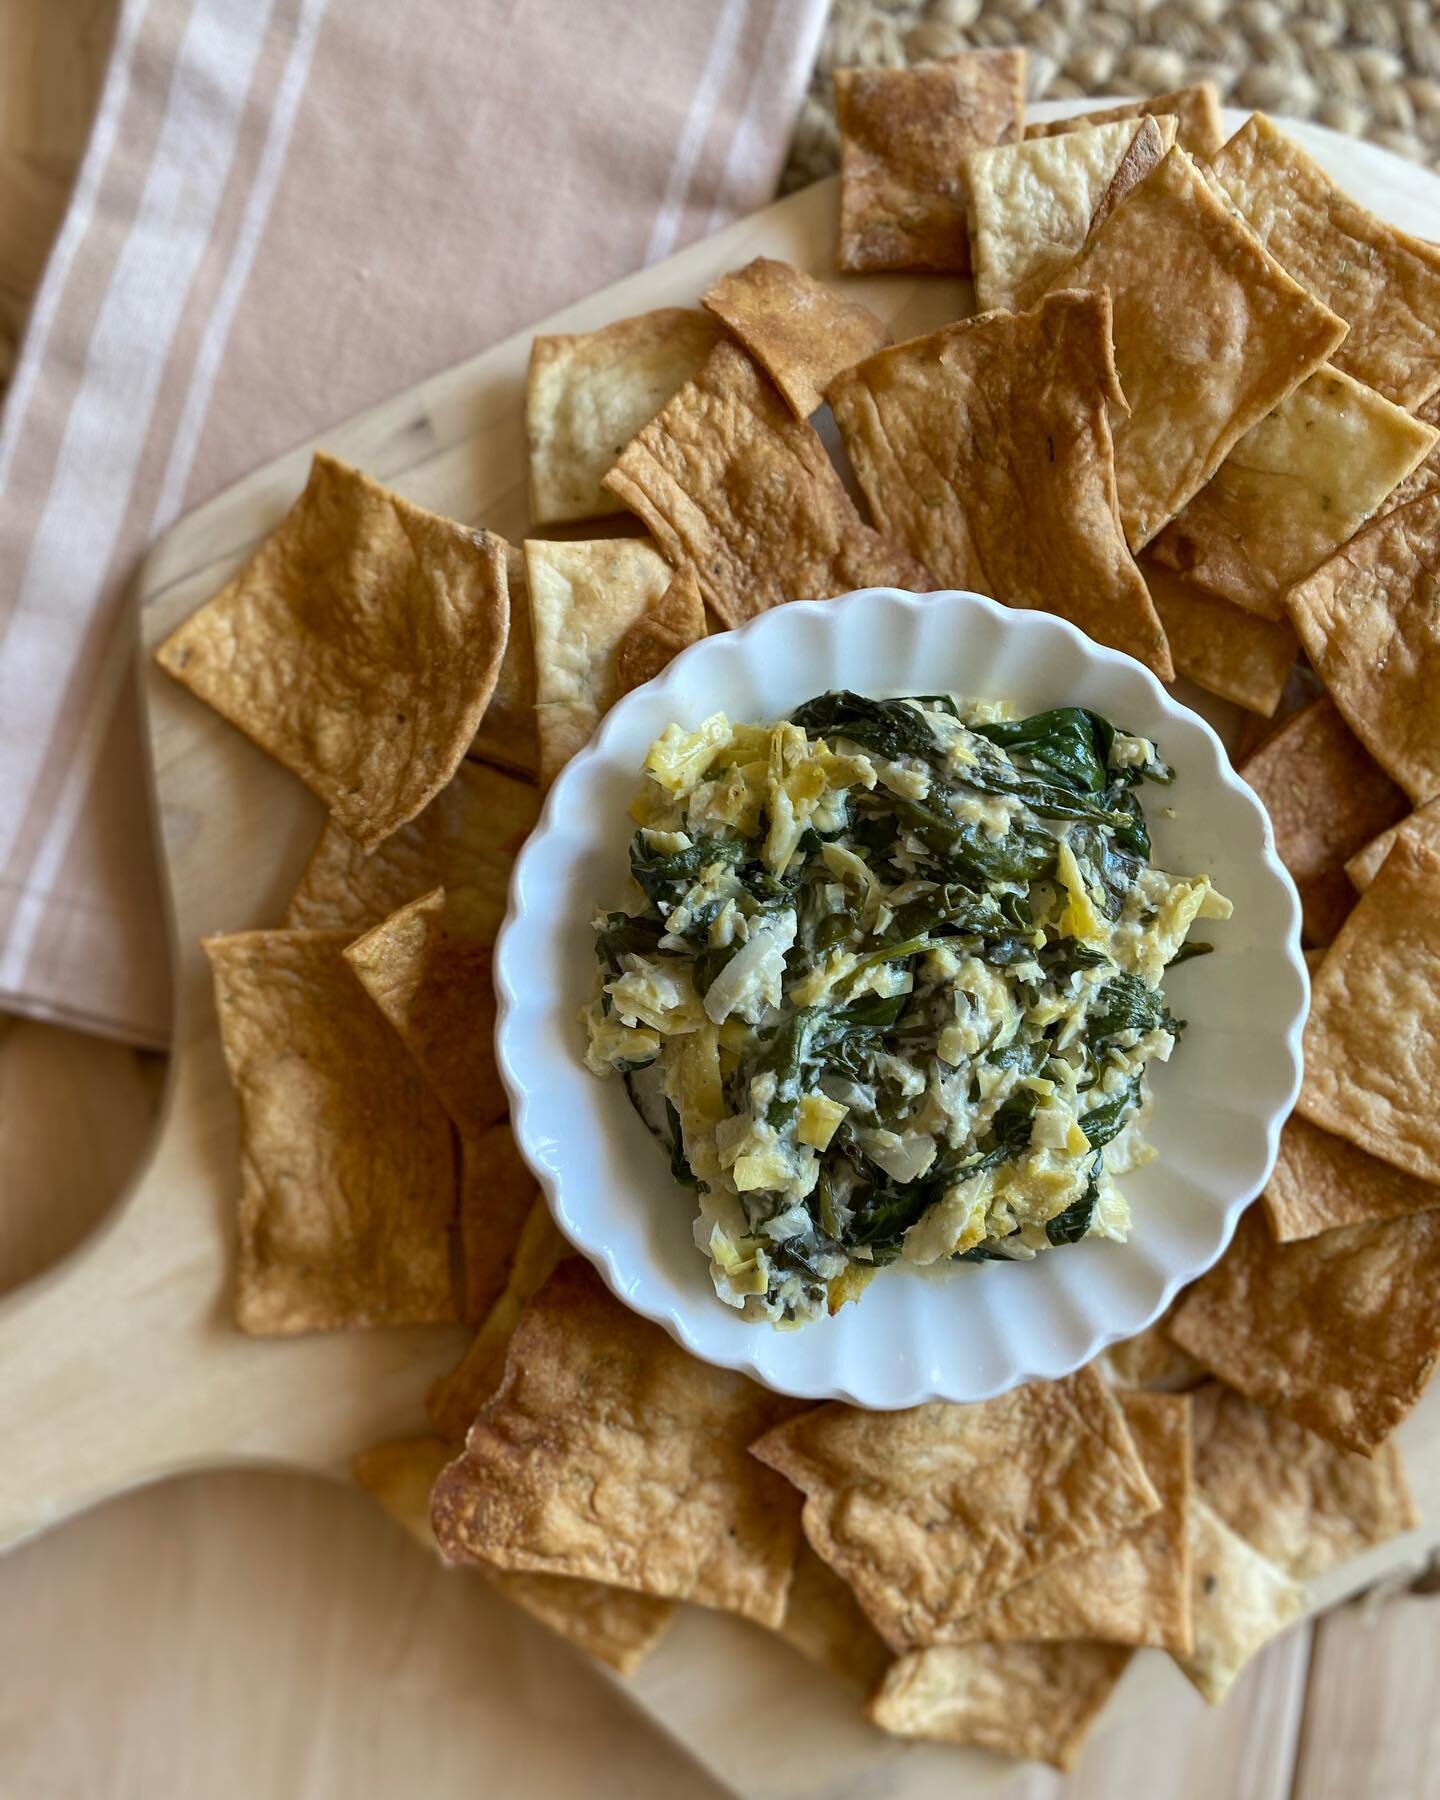 Another healthy take on a classic comfort aka this spinach and artichoke dip 😛 ⁣
⁣
This is one of my favorite quick, easy, and healthy recipes to put together when we entertain or feel like treating ourselves with a glass of wine at home. ⁣
⁣
Typica